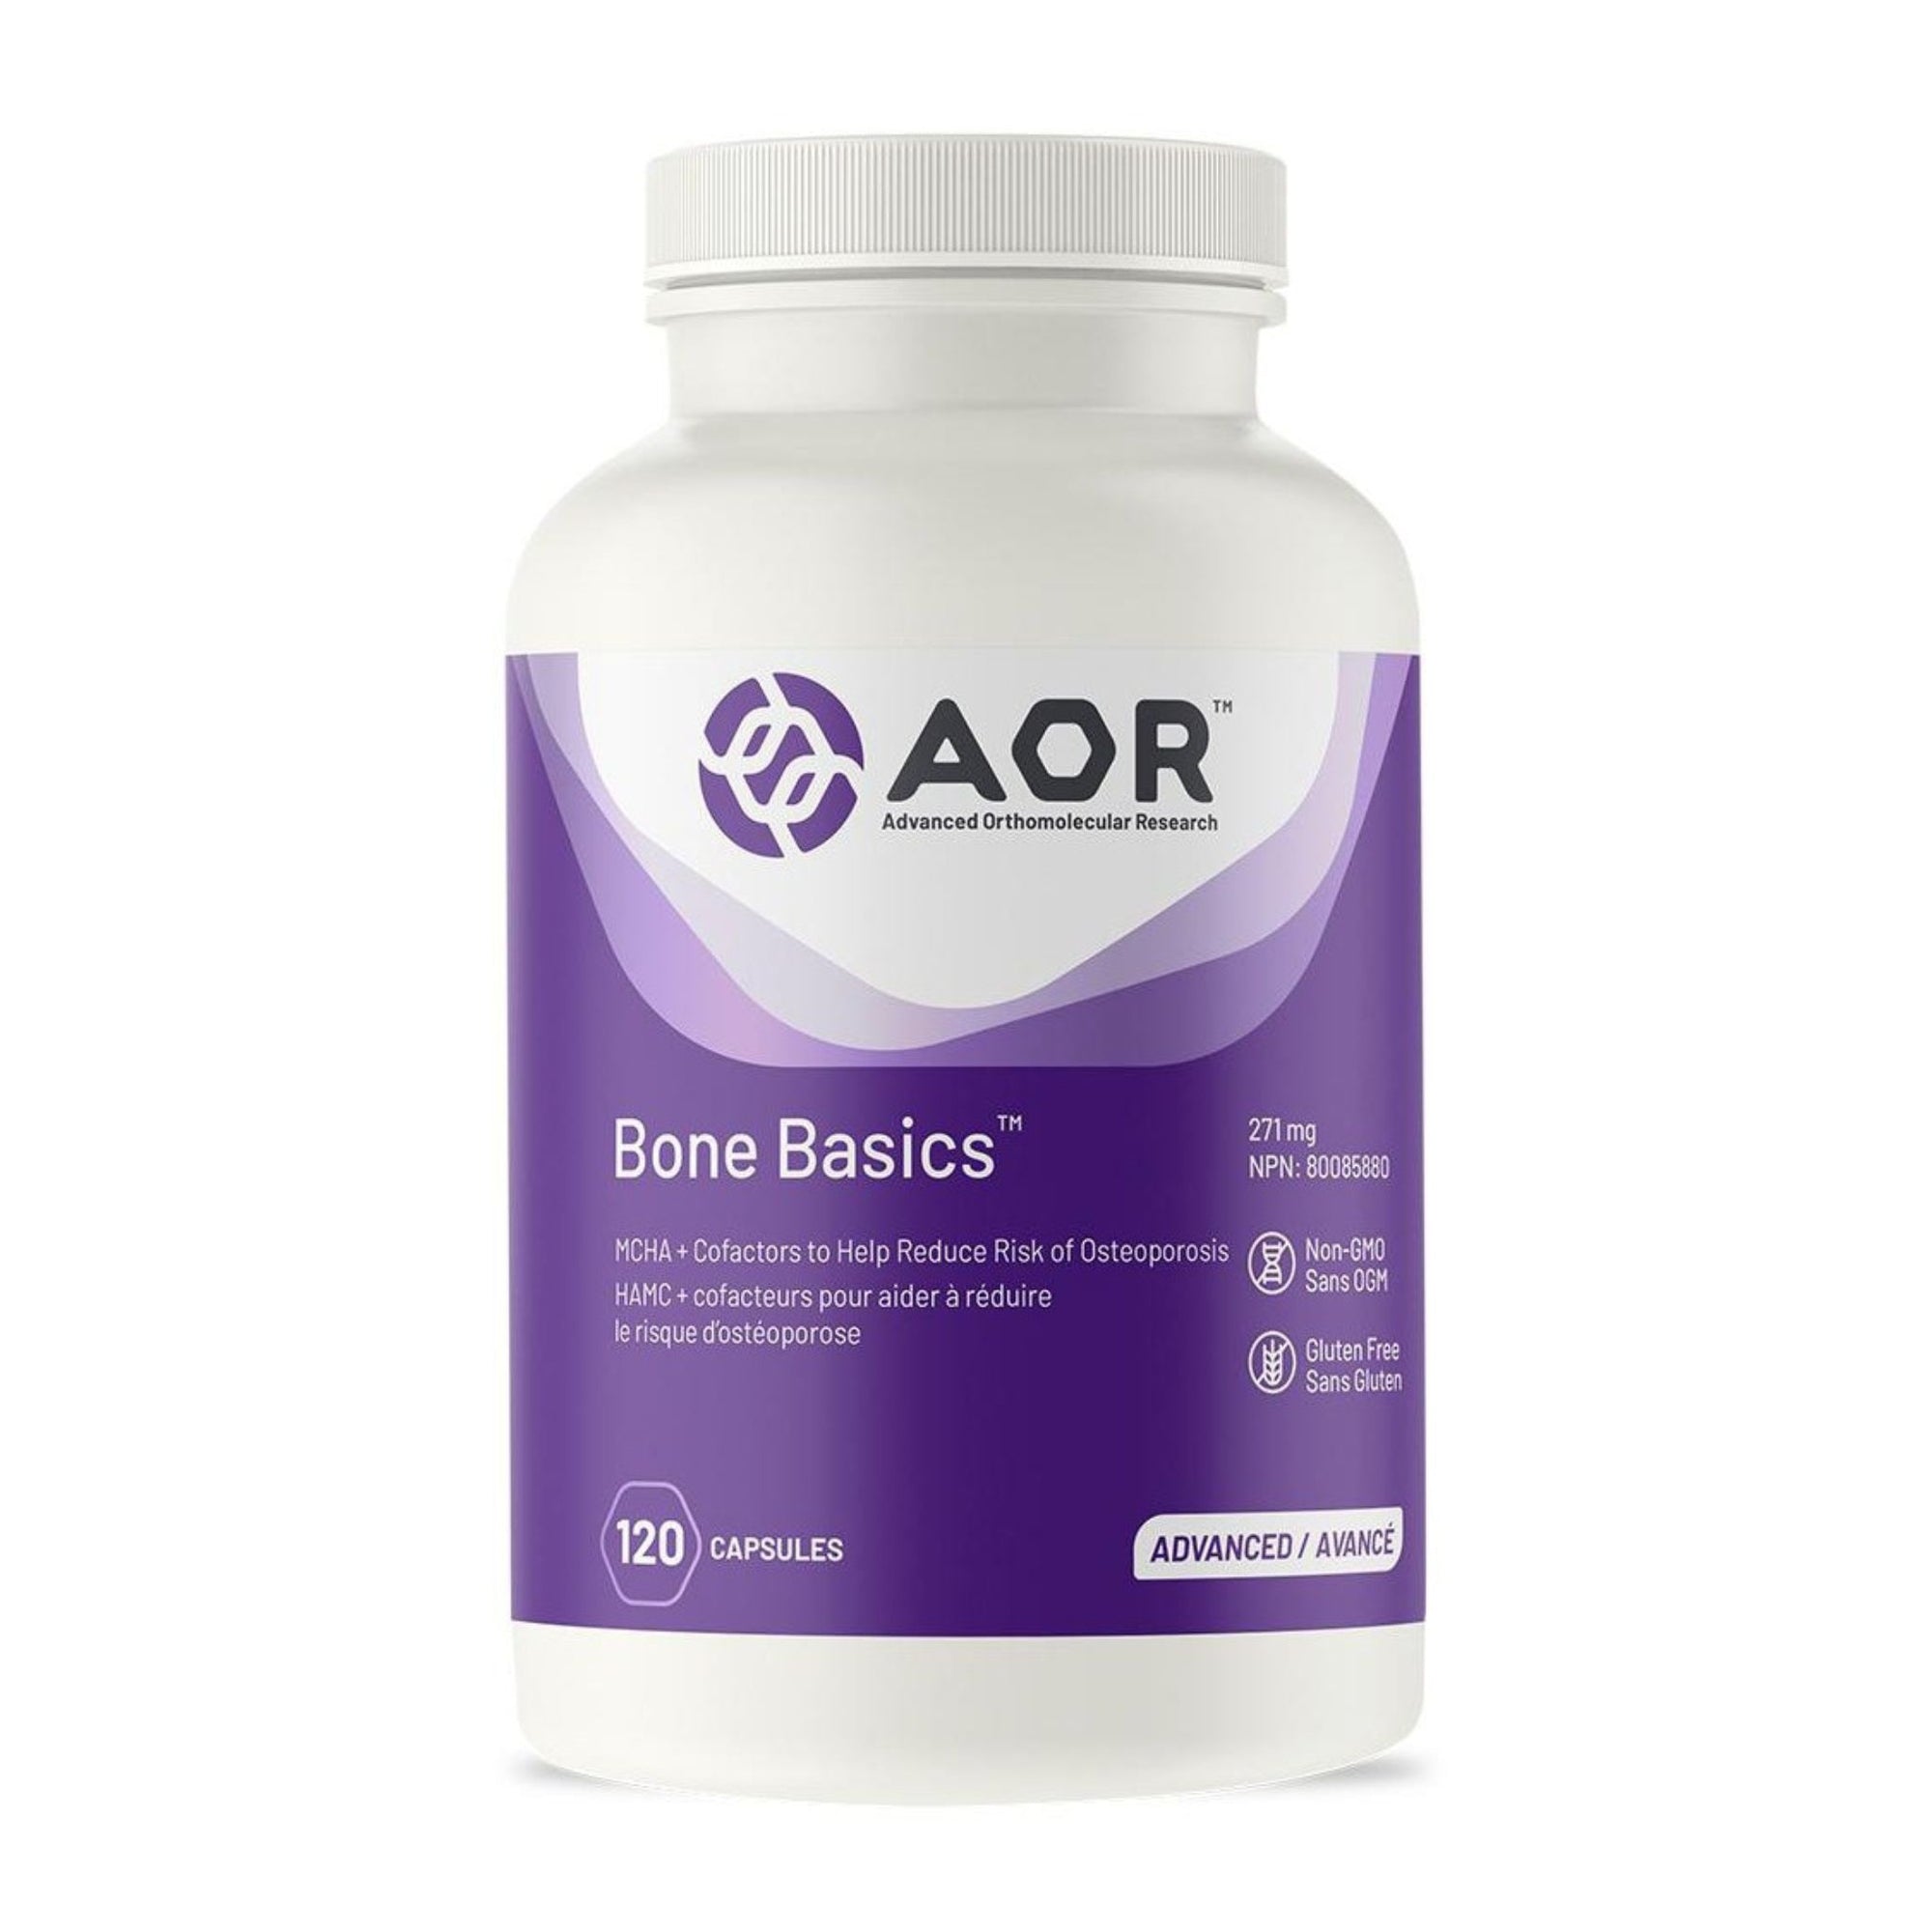 AOR Bone Basics 120 vegetable capsules - MCHA + CoFactors to help reduce the risk of osteoporosis - Non-GMO and gluten free